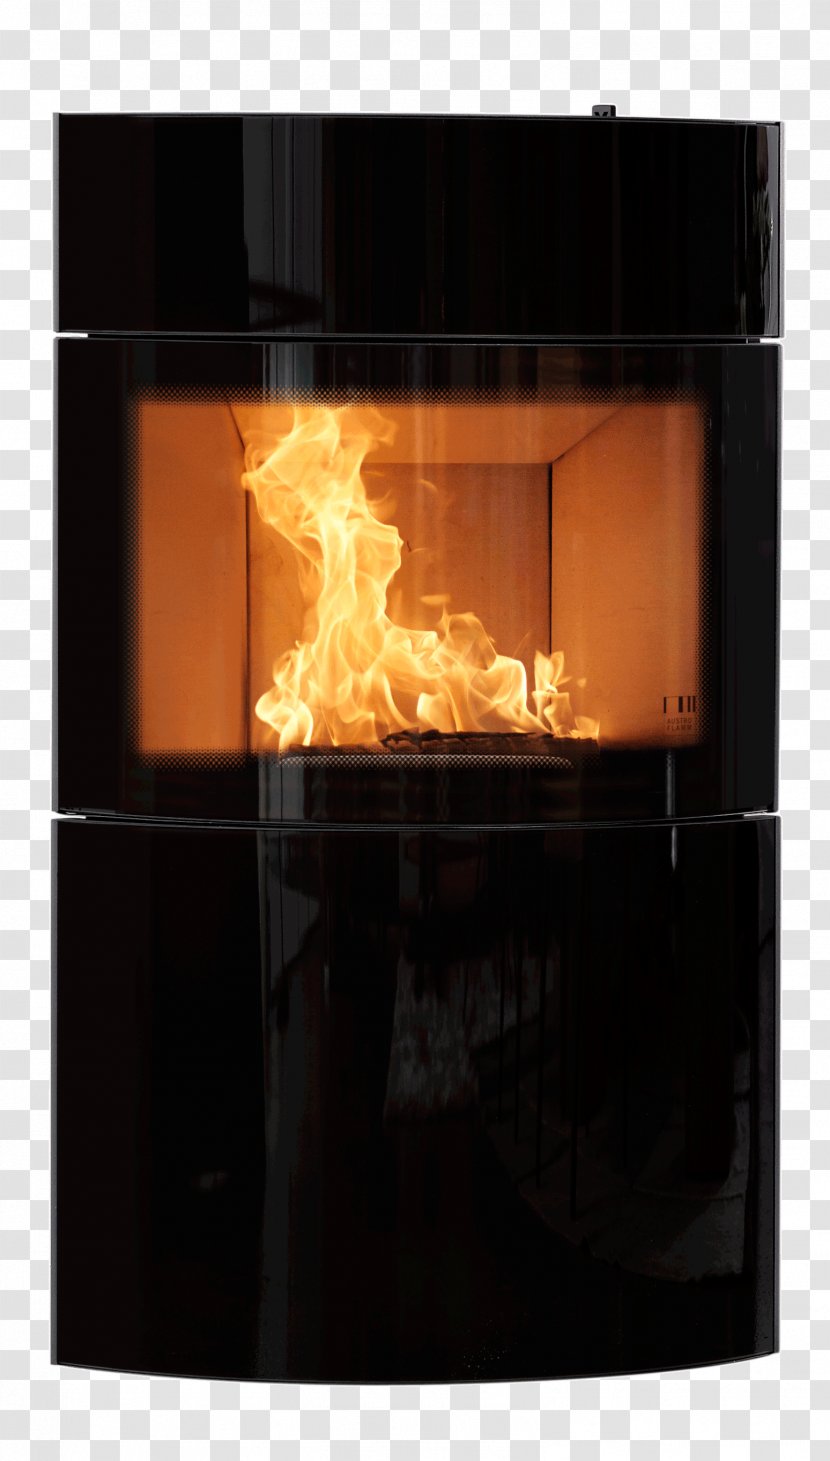 Wood Stoves Kaminofen Fireplace Ceramic - Hearth - Stove Transparent PNG